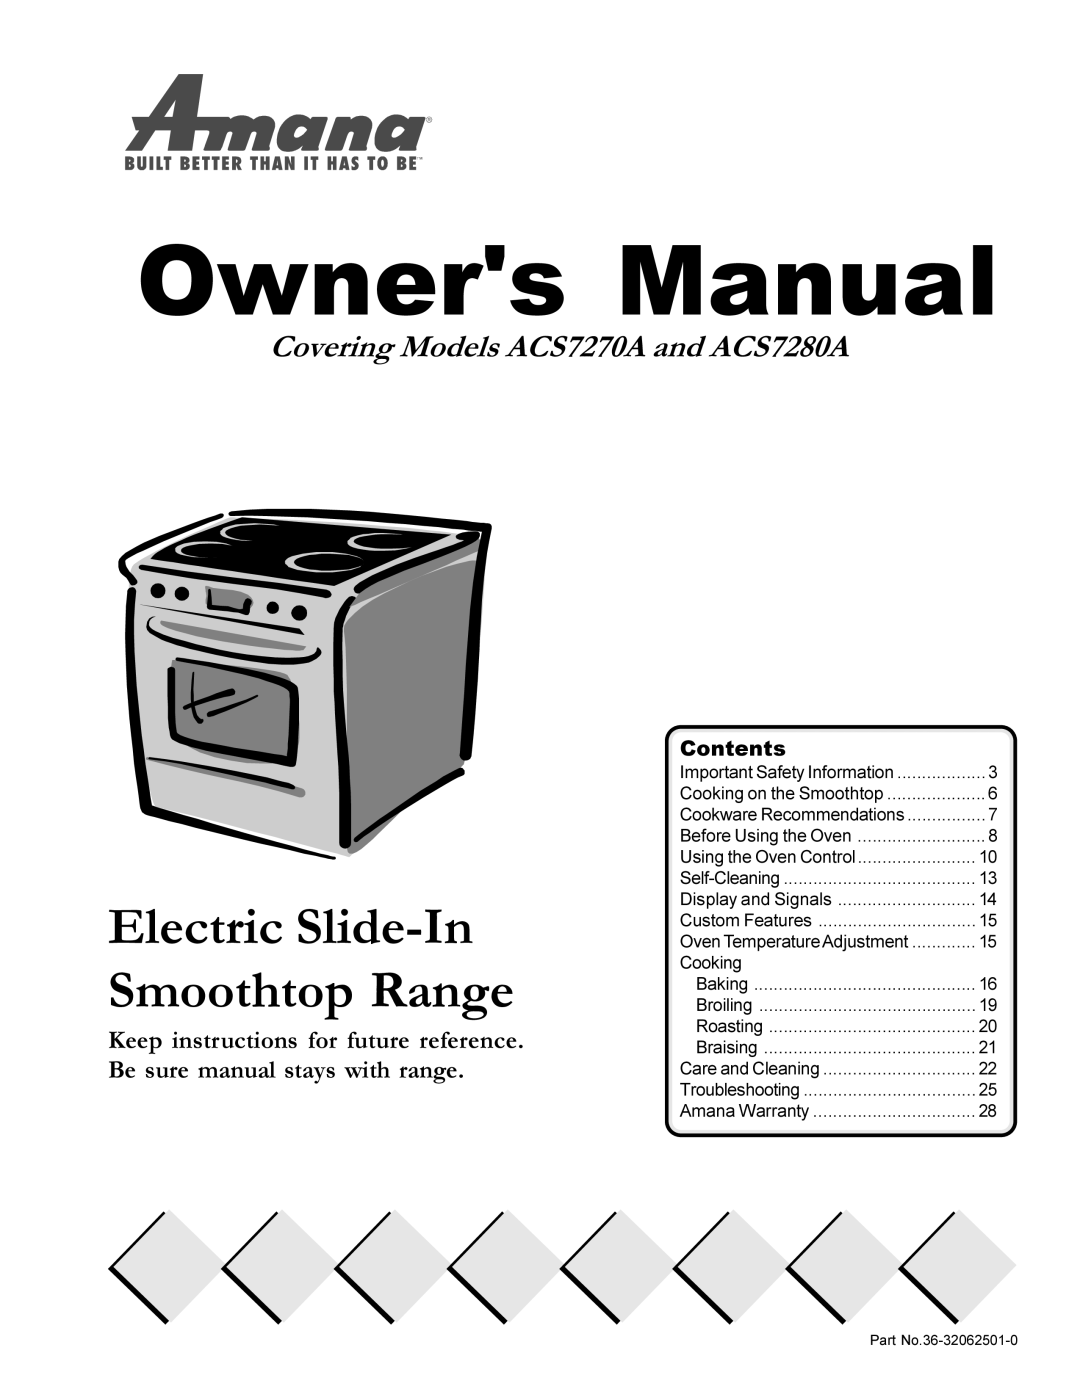 Amana owner manual Covering Models ACS7270A and ACS7280A, Contents 